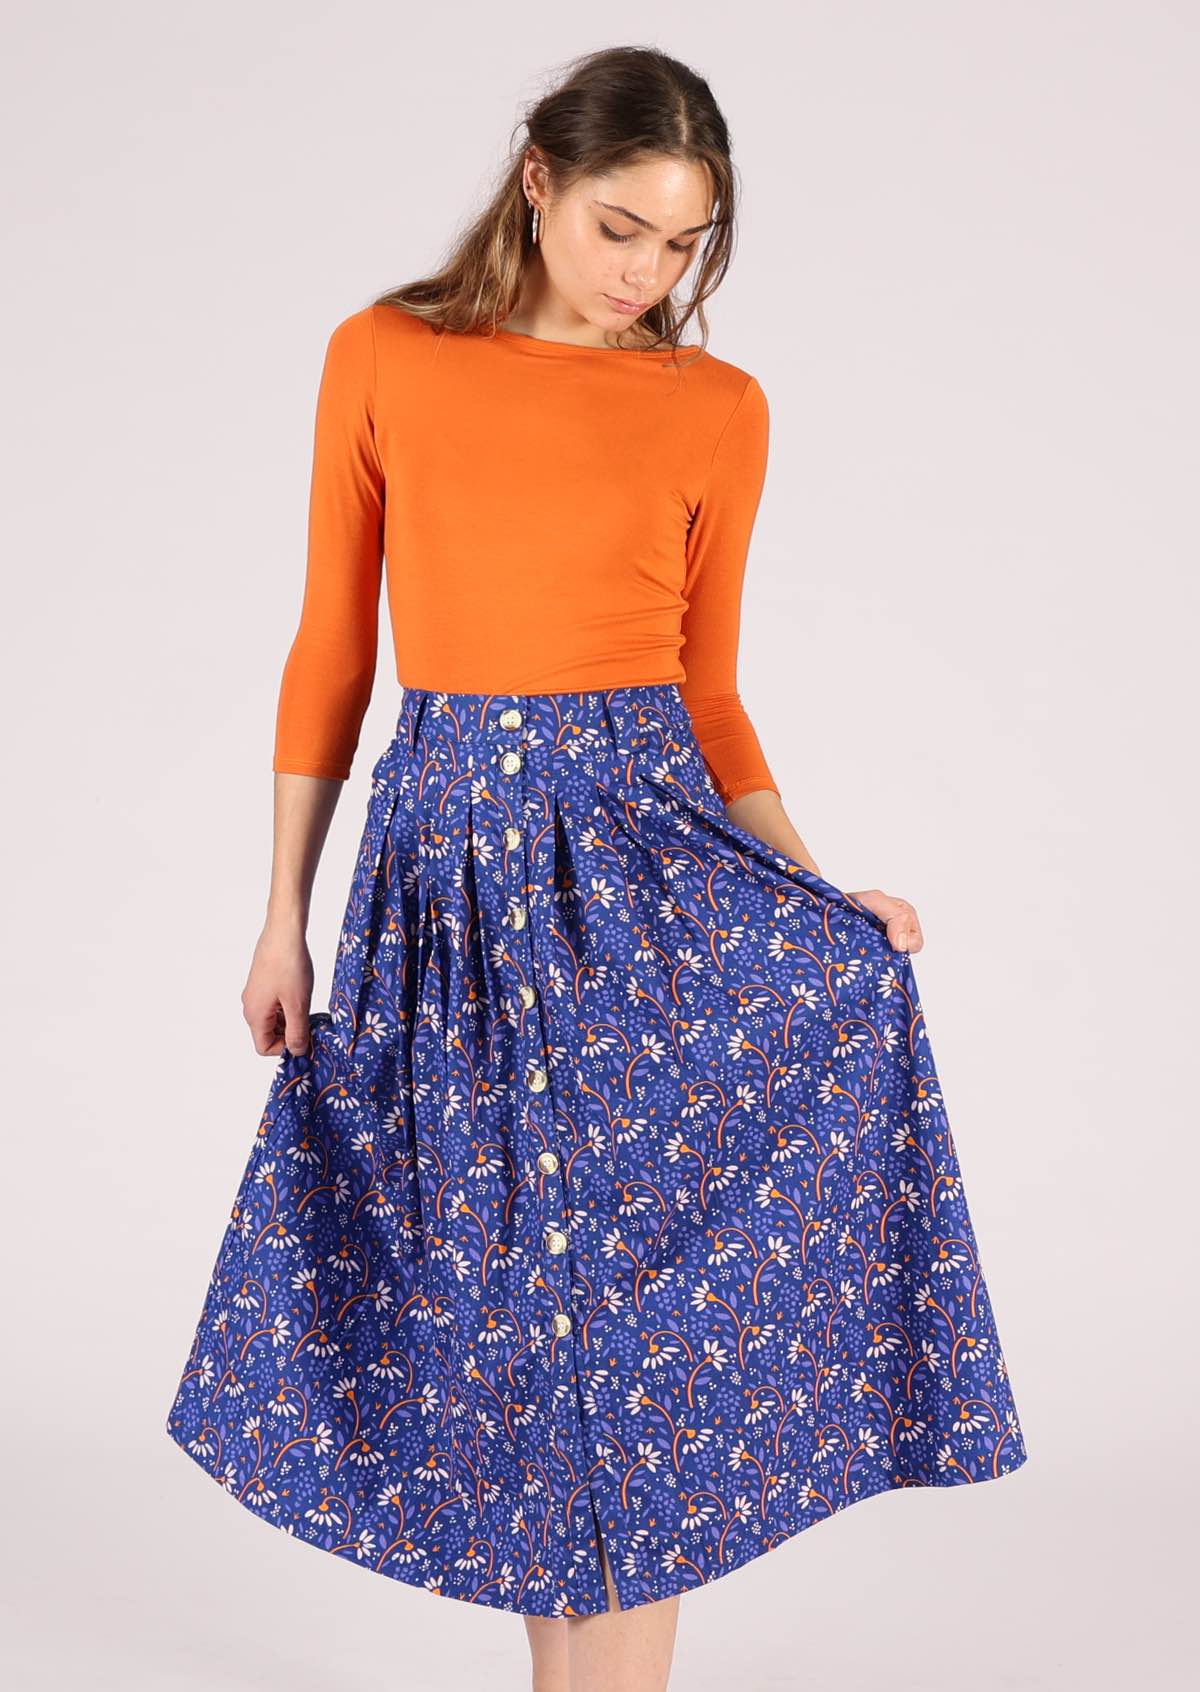 Model wears blue based skirt with a fun orange and off white daisy pattern. 